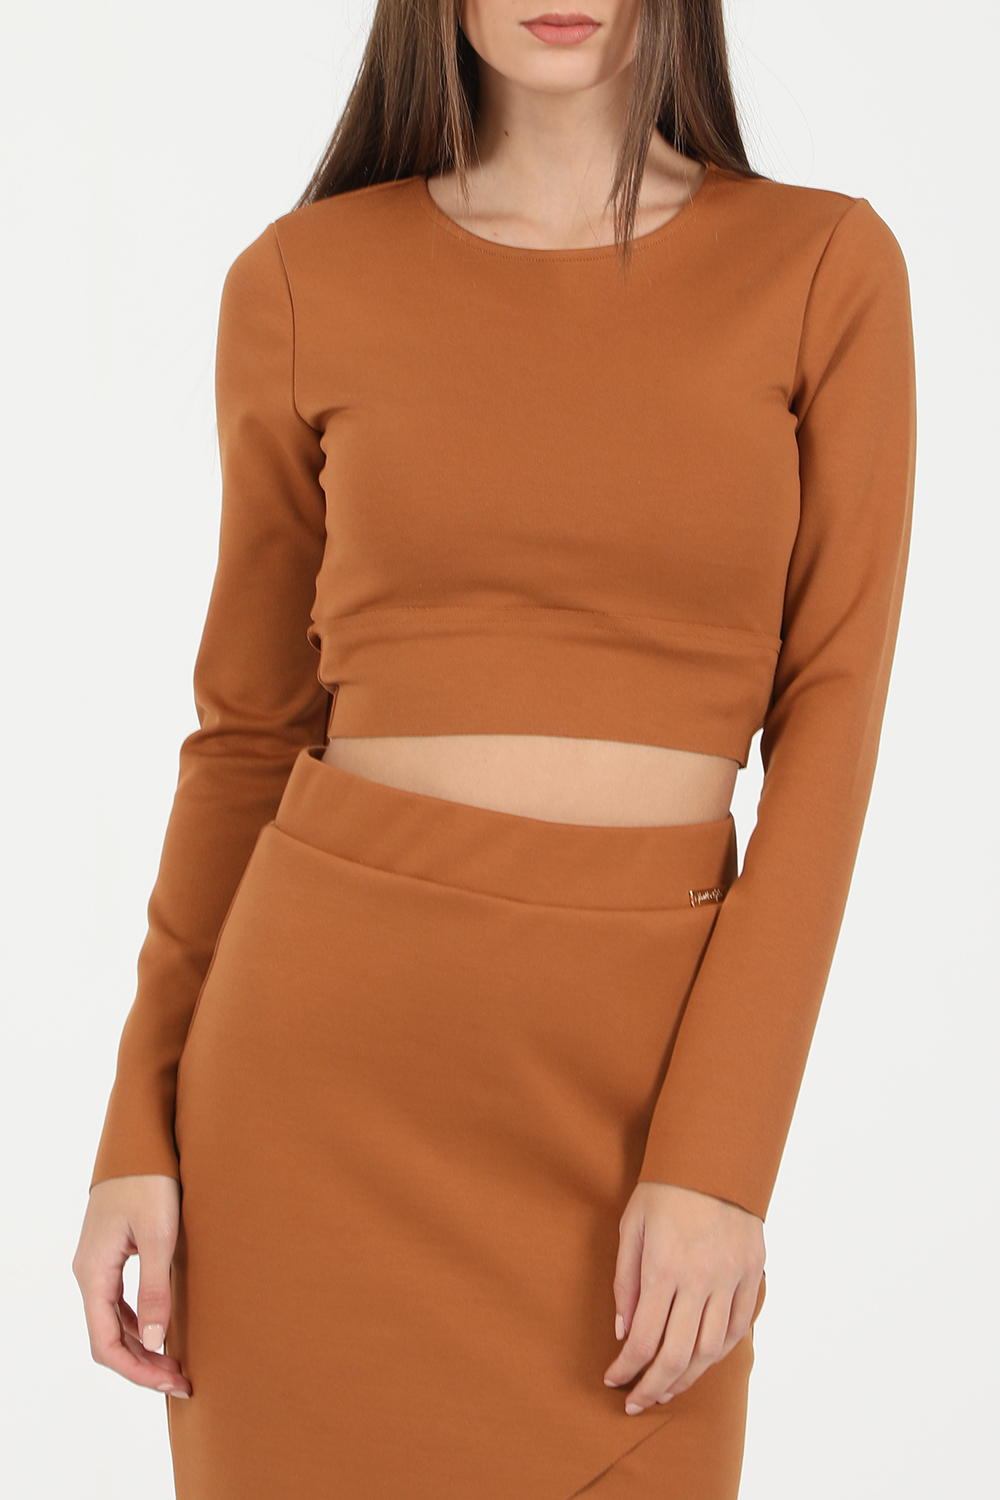 KENDALL + KYLIE – Γυναικειο cropped top KENDALL + KYLIE TURTLENECK DRAPPED TOP καφε